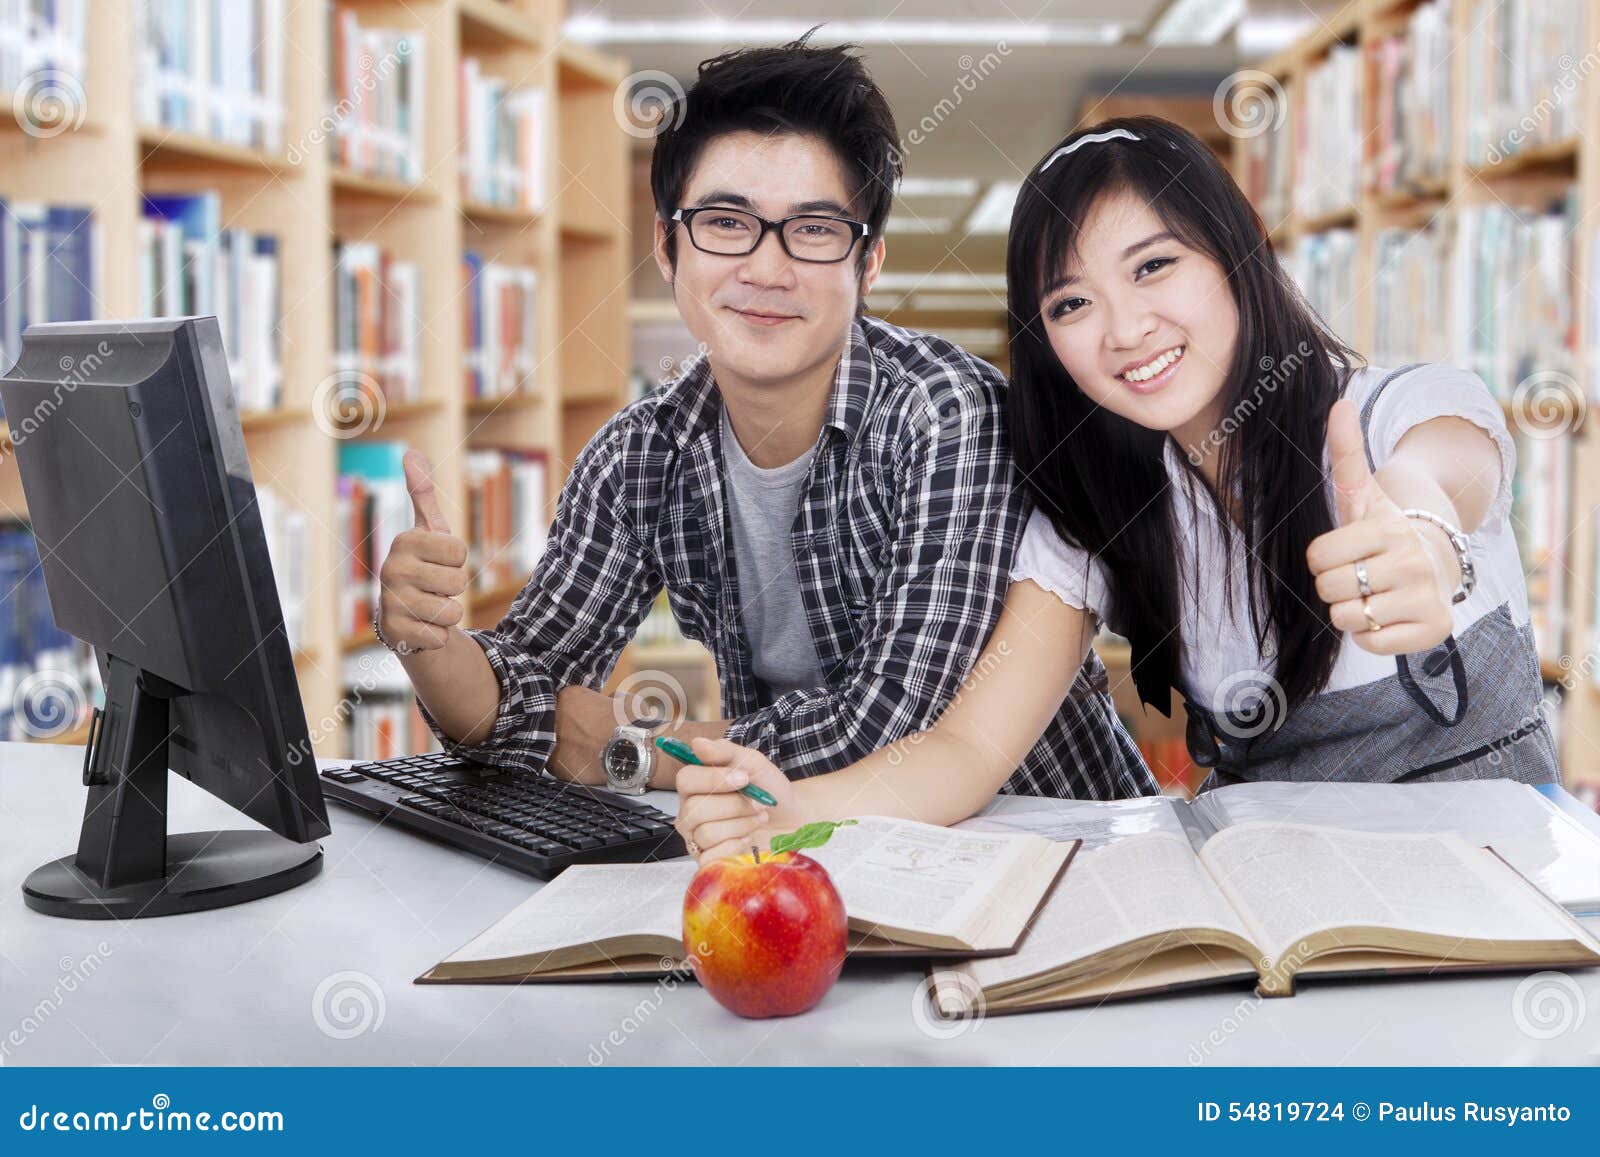 Students Showing Thumbs Up in Library Stock Photo image